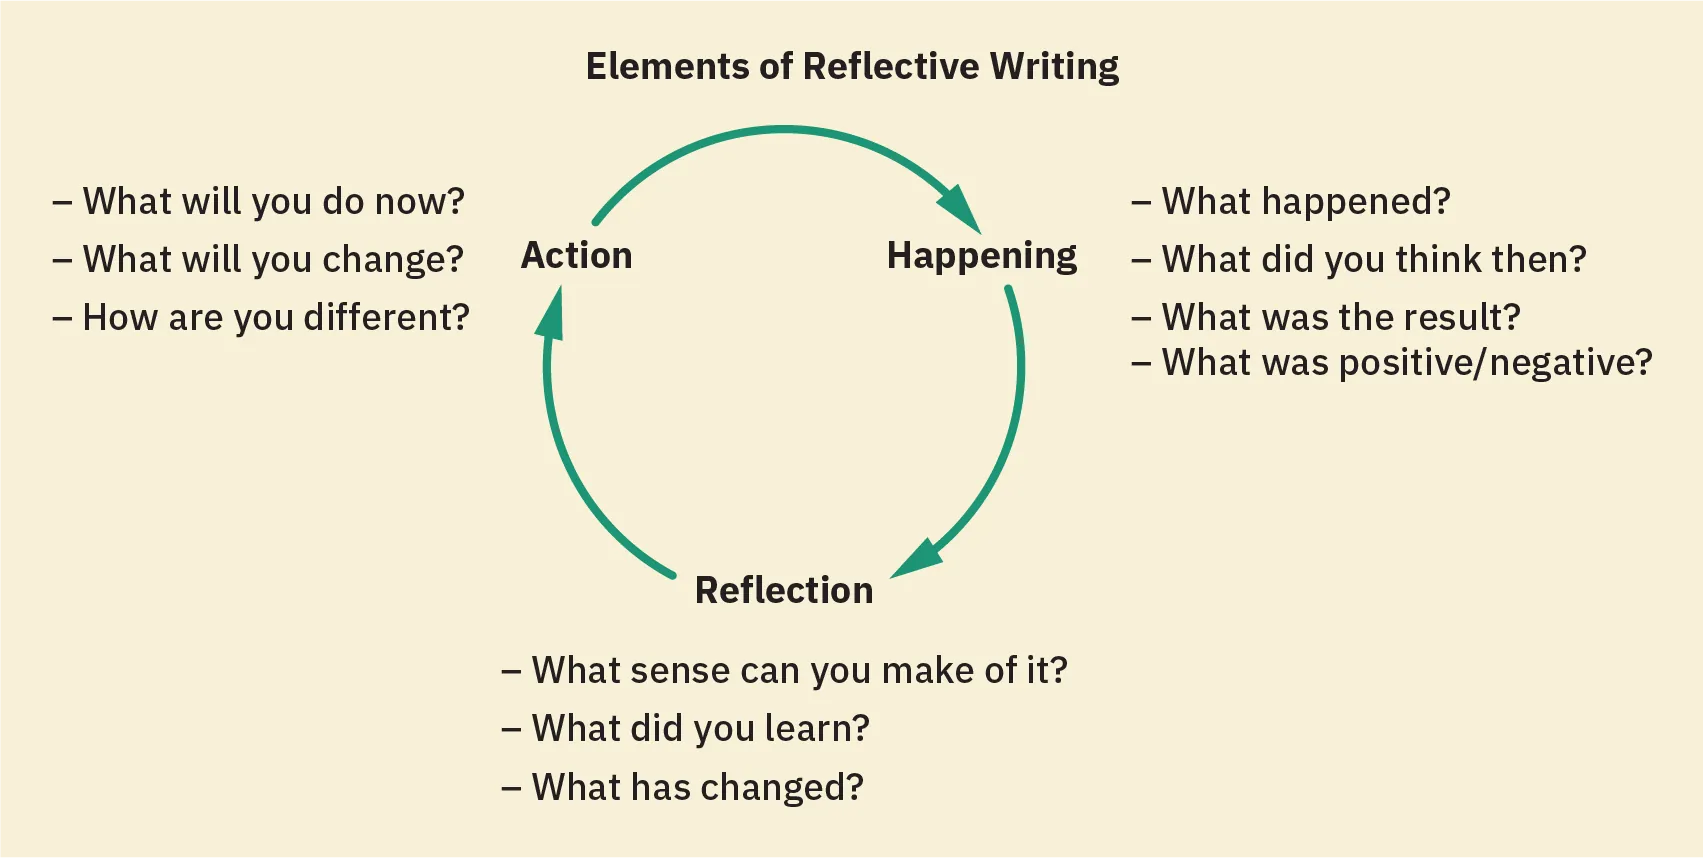 As shown in this circular diagram, reflective writing includes the happening, reflection about the happening, and then an action that will result from the reflection about the happening.